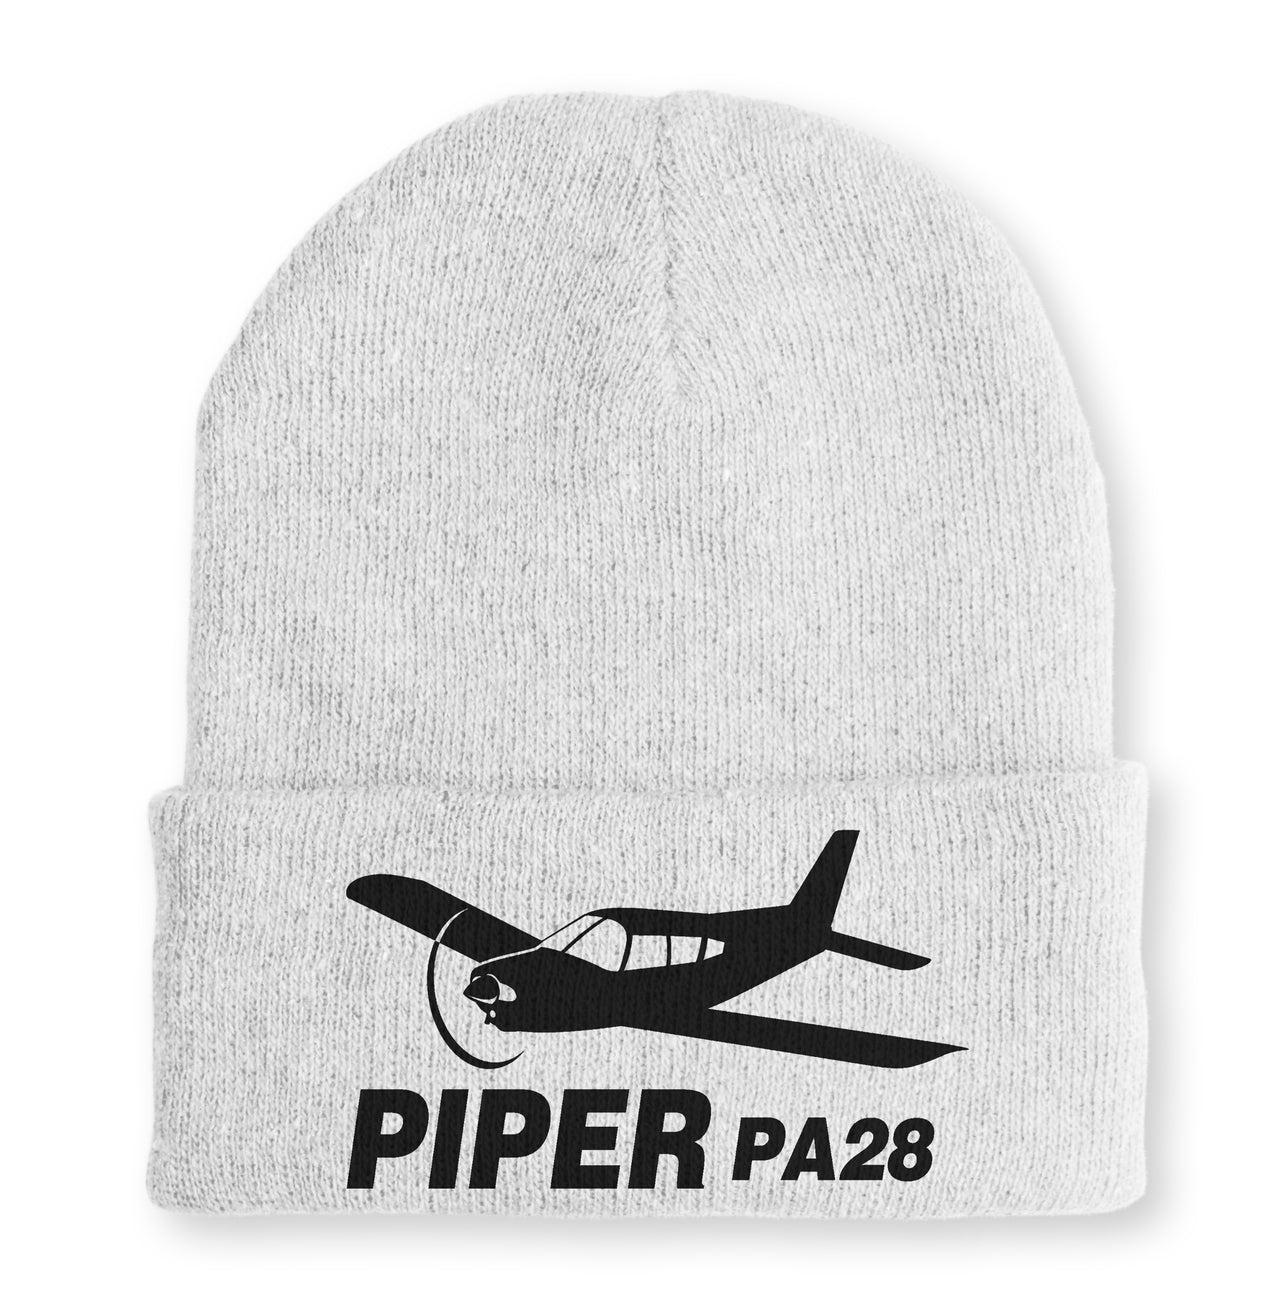 The Piper PA28 Embroidered Beanies